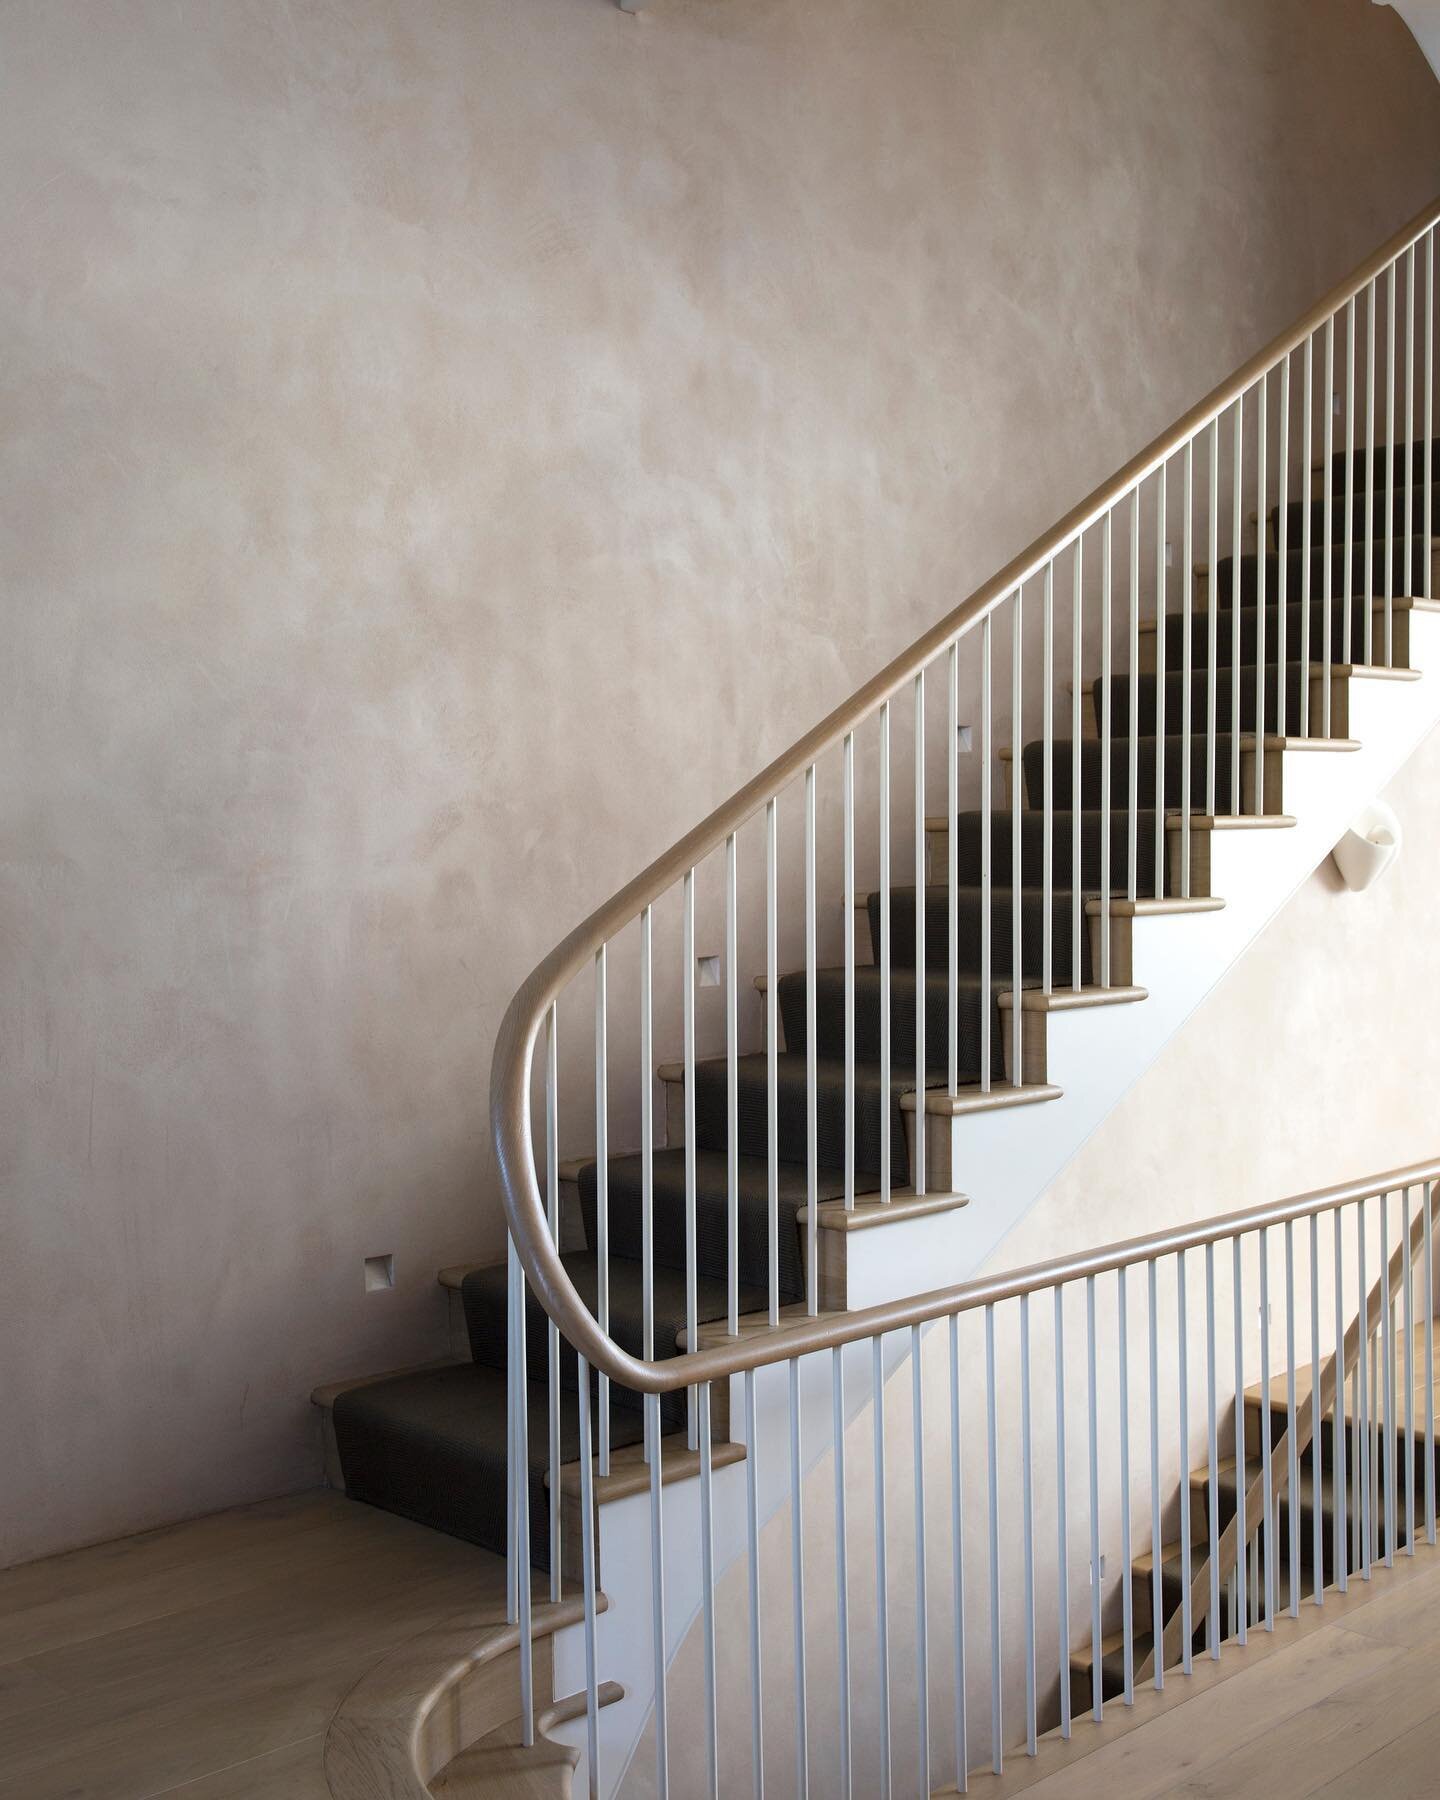 Less is more.. beautiful, stylish and sleek, complementing neat clayfinish walls.. 

#staircase #simplicity #moderndesign #clayworksclayplasters #homedecor #staircasedesign #staircasedecor #clayplasterwalls #elegance #neatwork #londonliving #chelseah